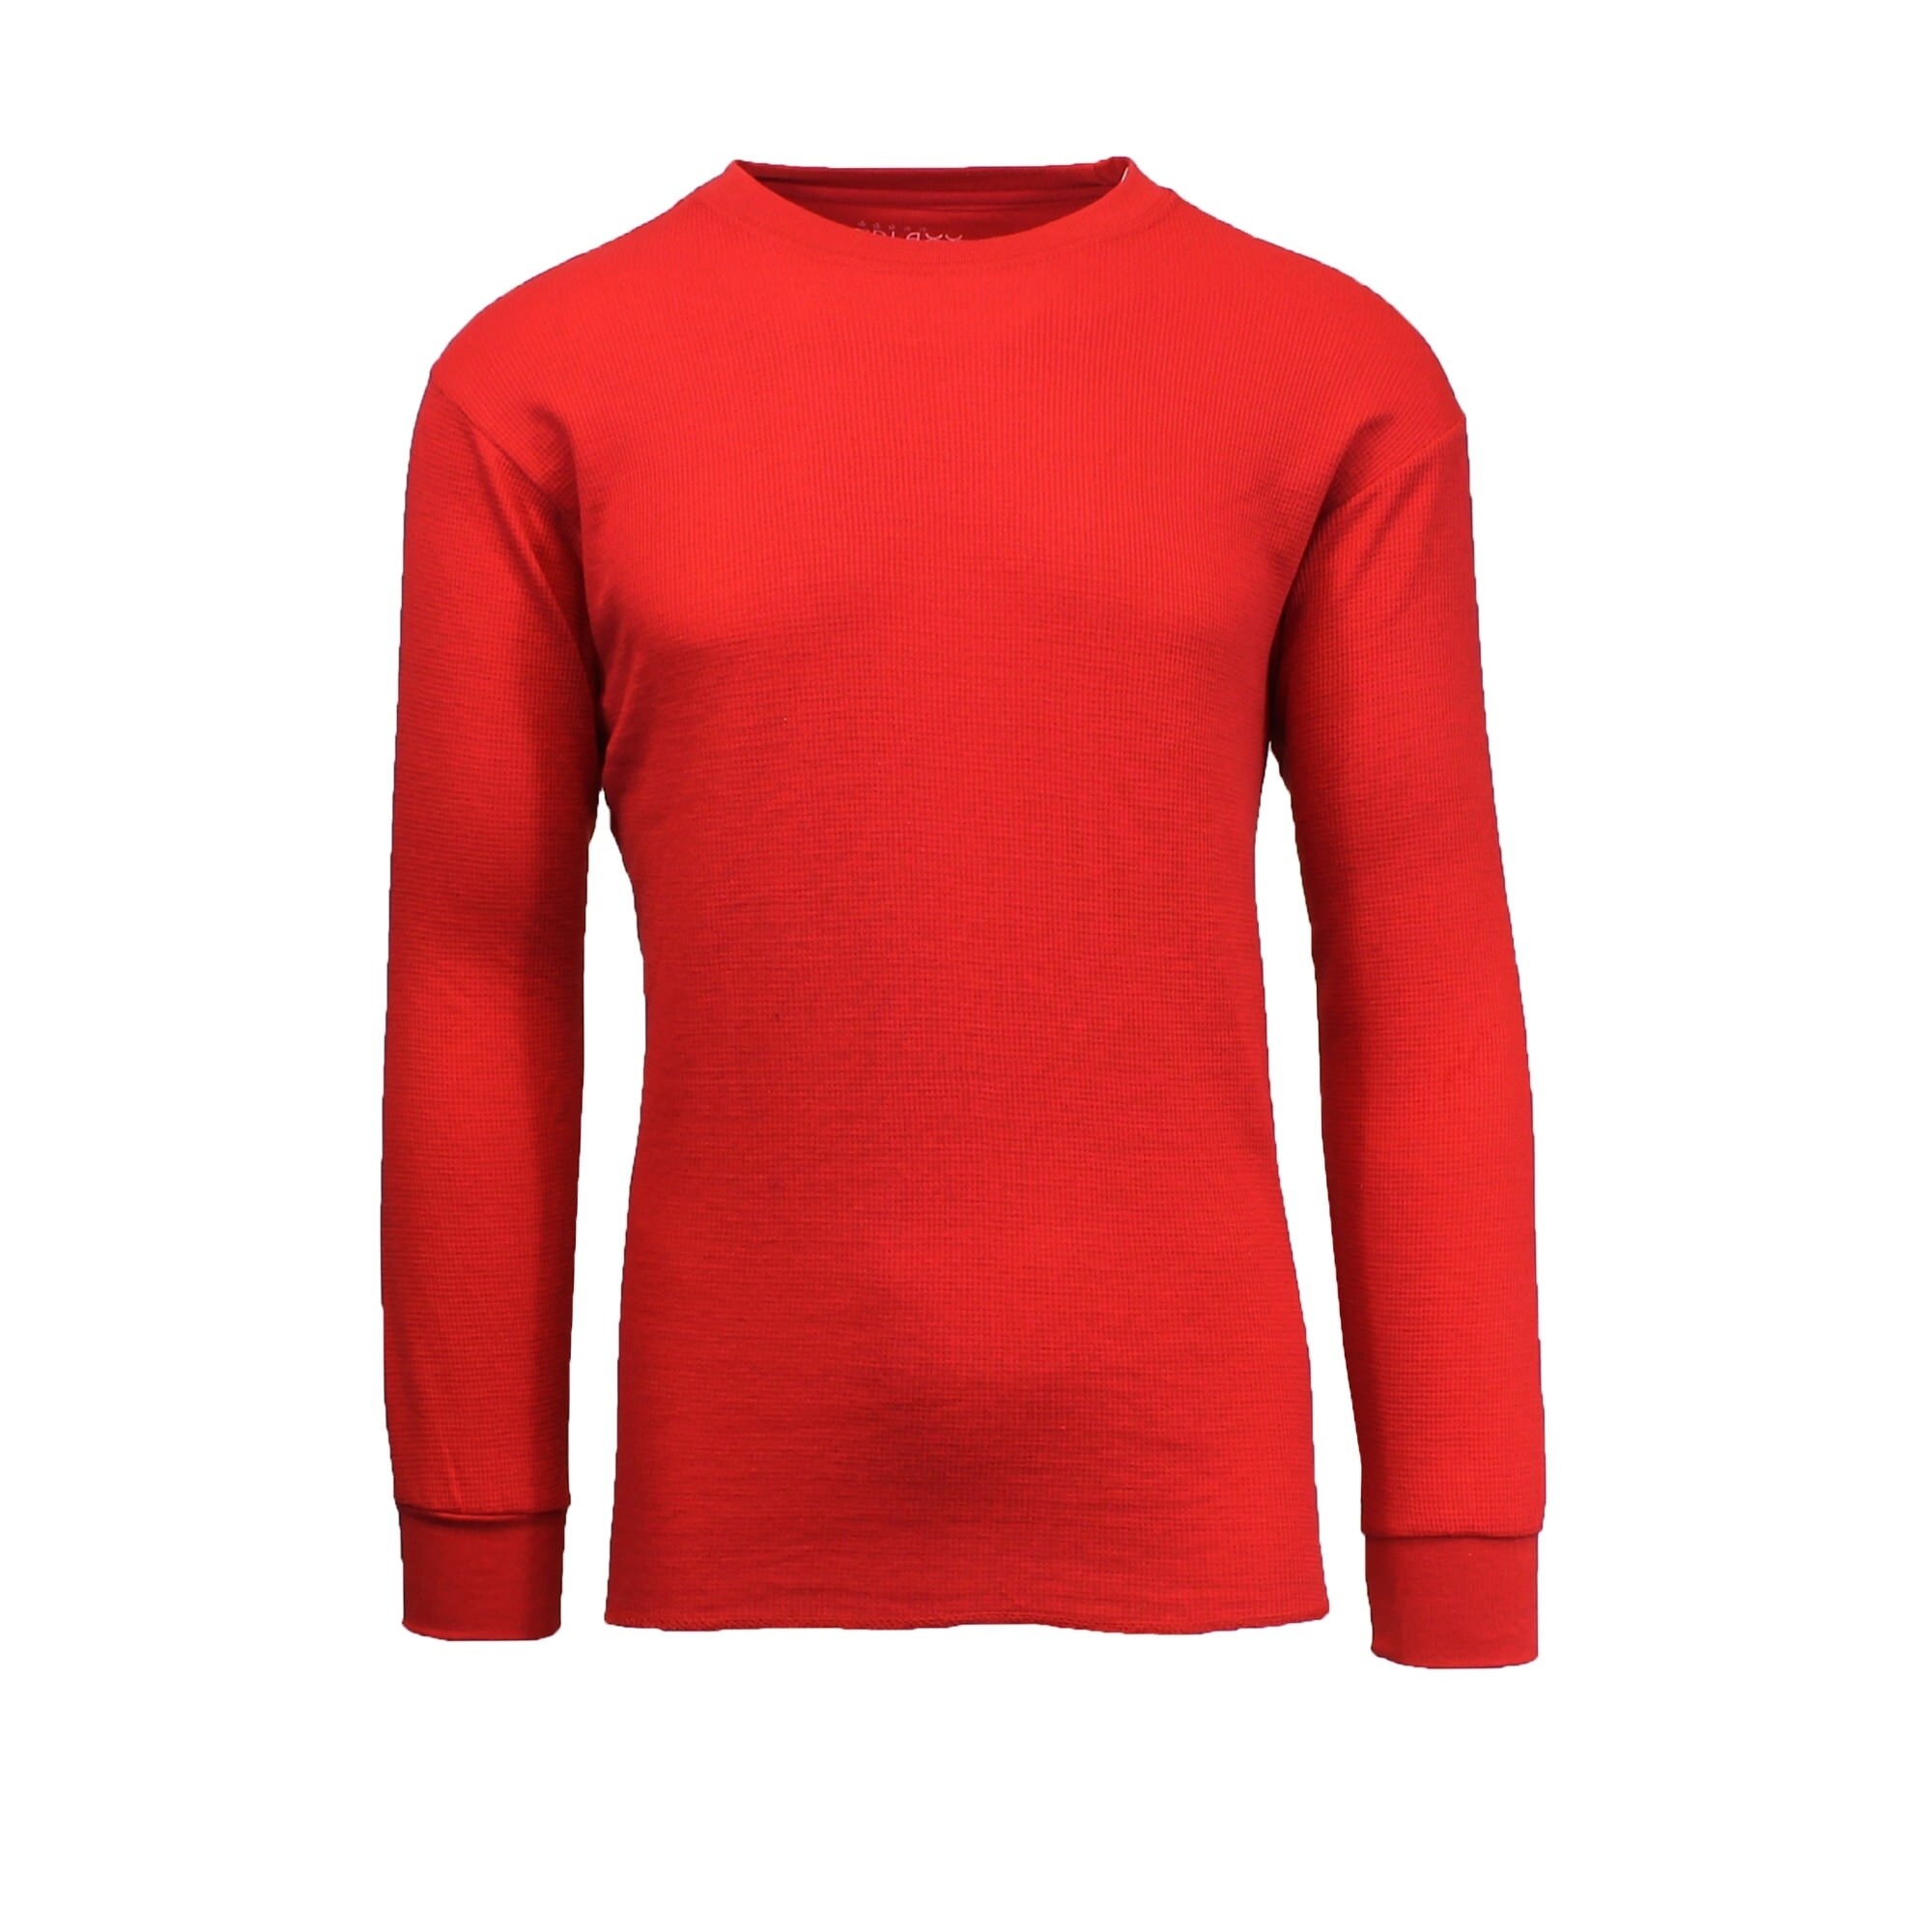 red thermal long sleeve shirt